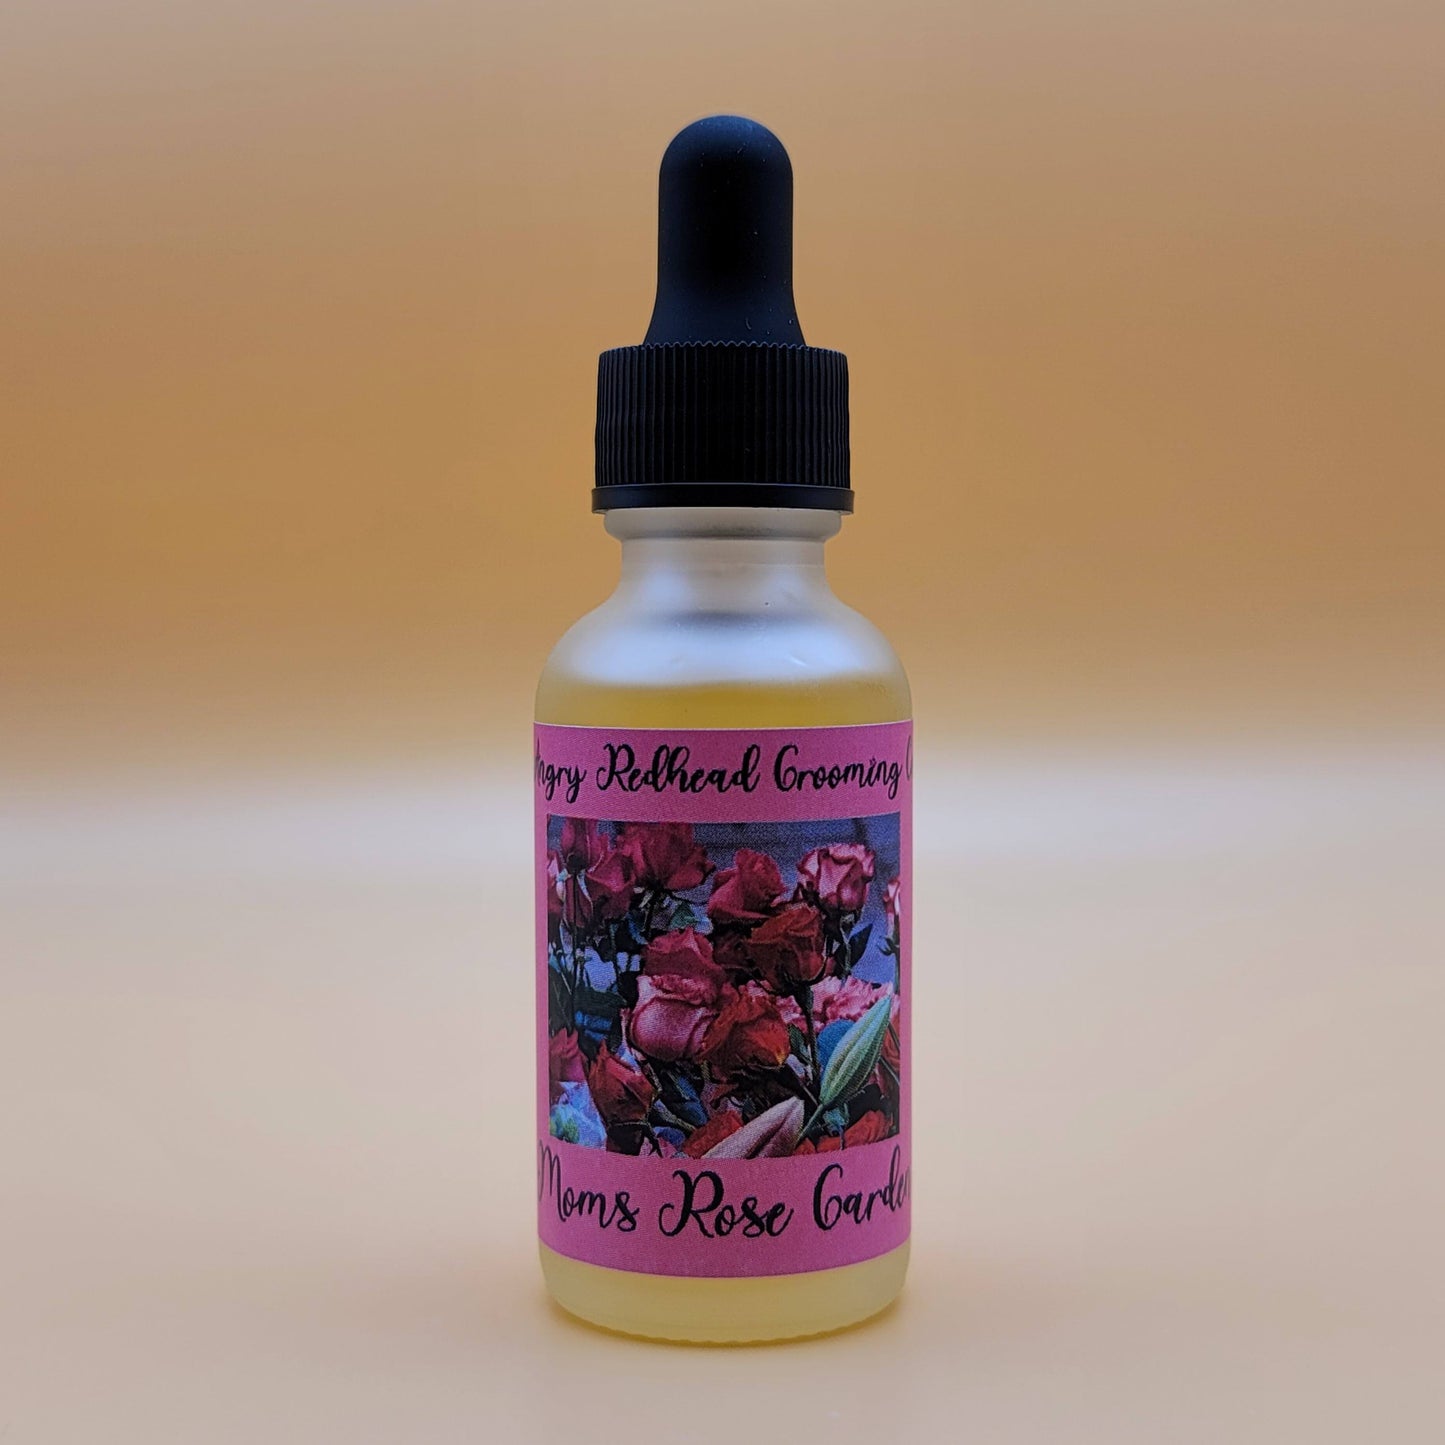 Mom's Rose Garden Pre-Shave Oil by Angry Redhead Grooming Co - angryredheadgrooming.com